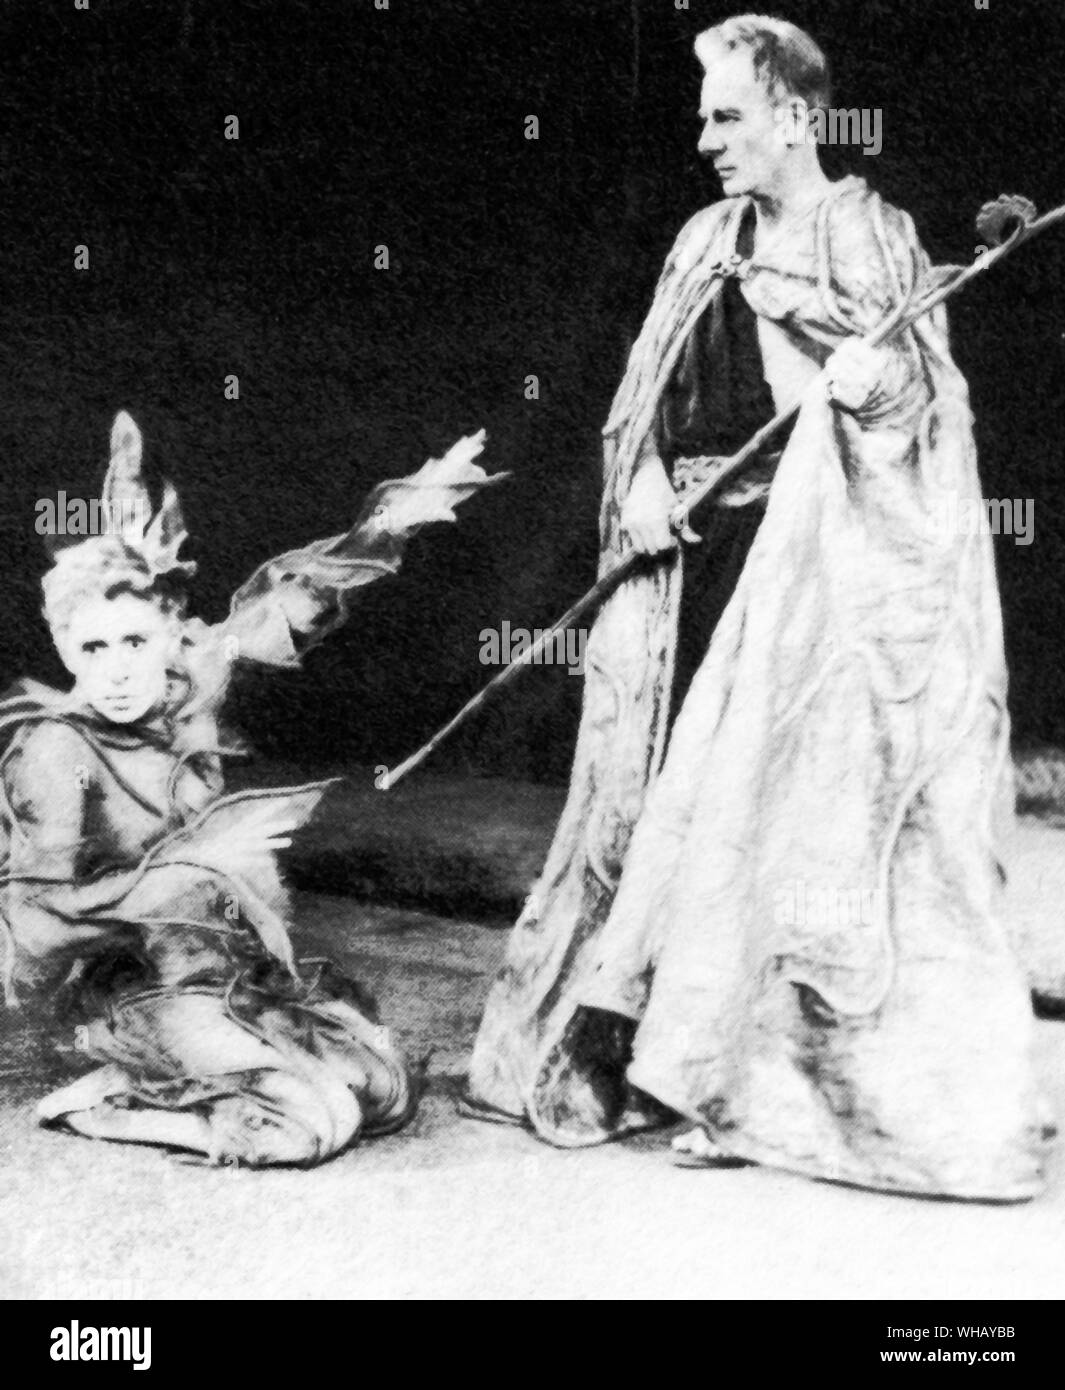 John Gielgud as Prospero and Ian holm as Aeriel in Peter Brooks's The Tempest, Royal Shakespeare Theatre, Stratford-upon-Avon 1957 Stock Photo